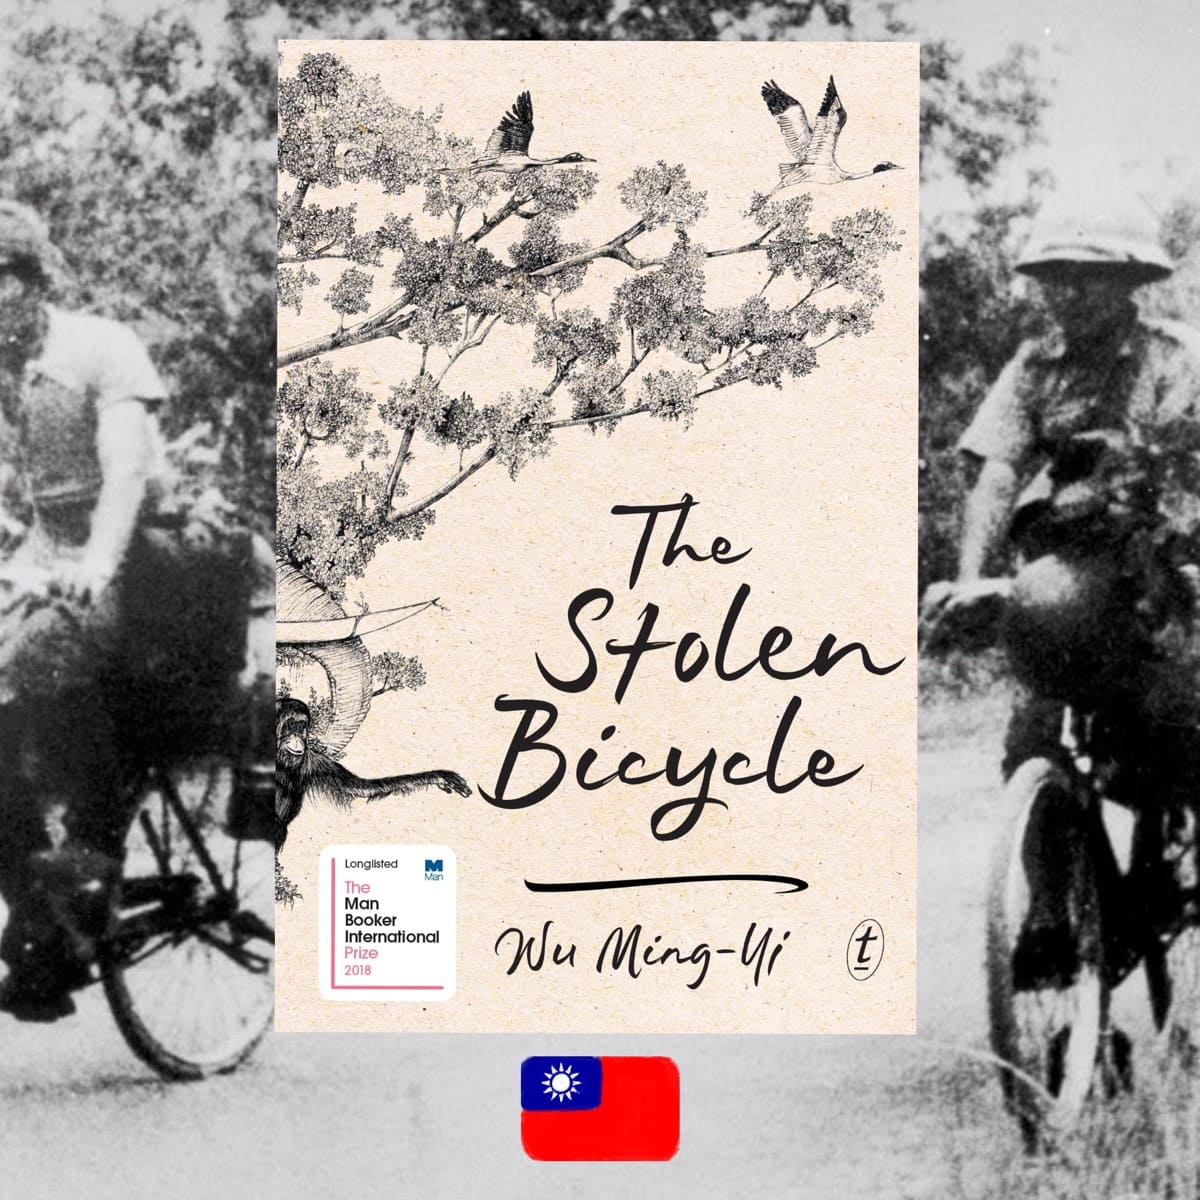 Wu Ming-yi, The Stolen Bicycle, book cover